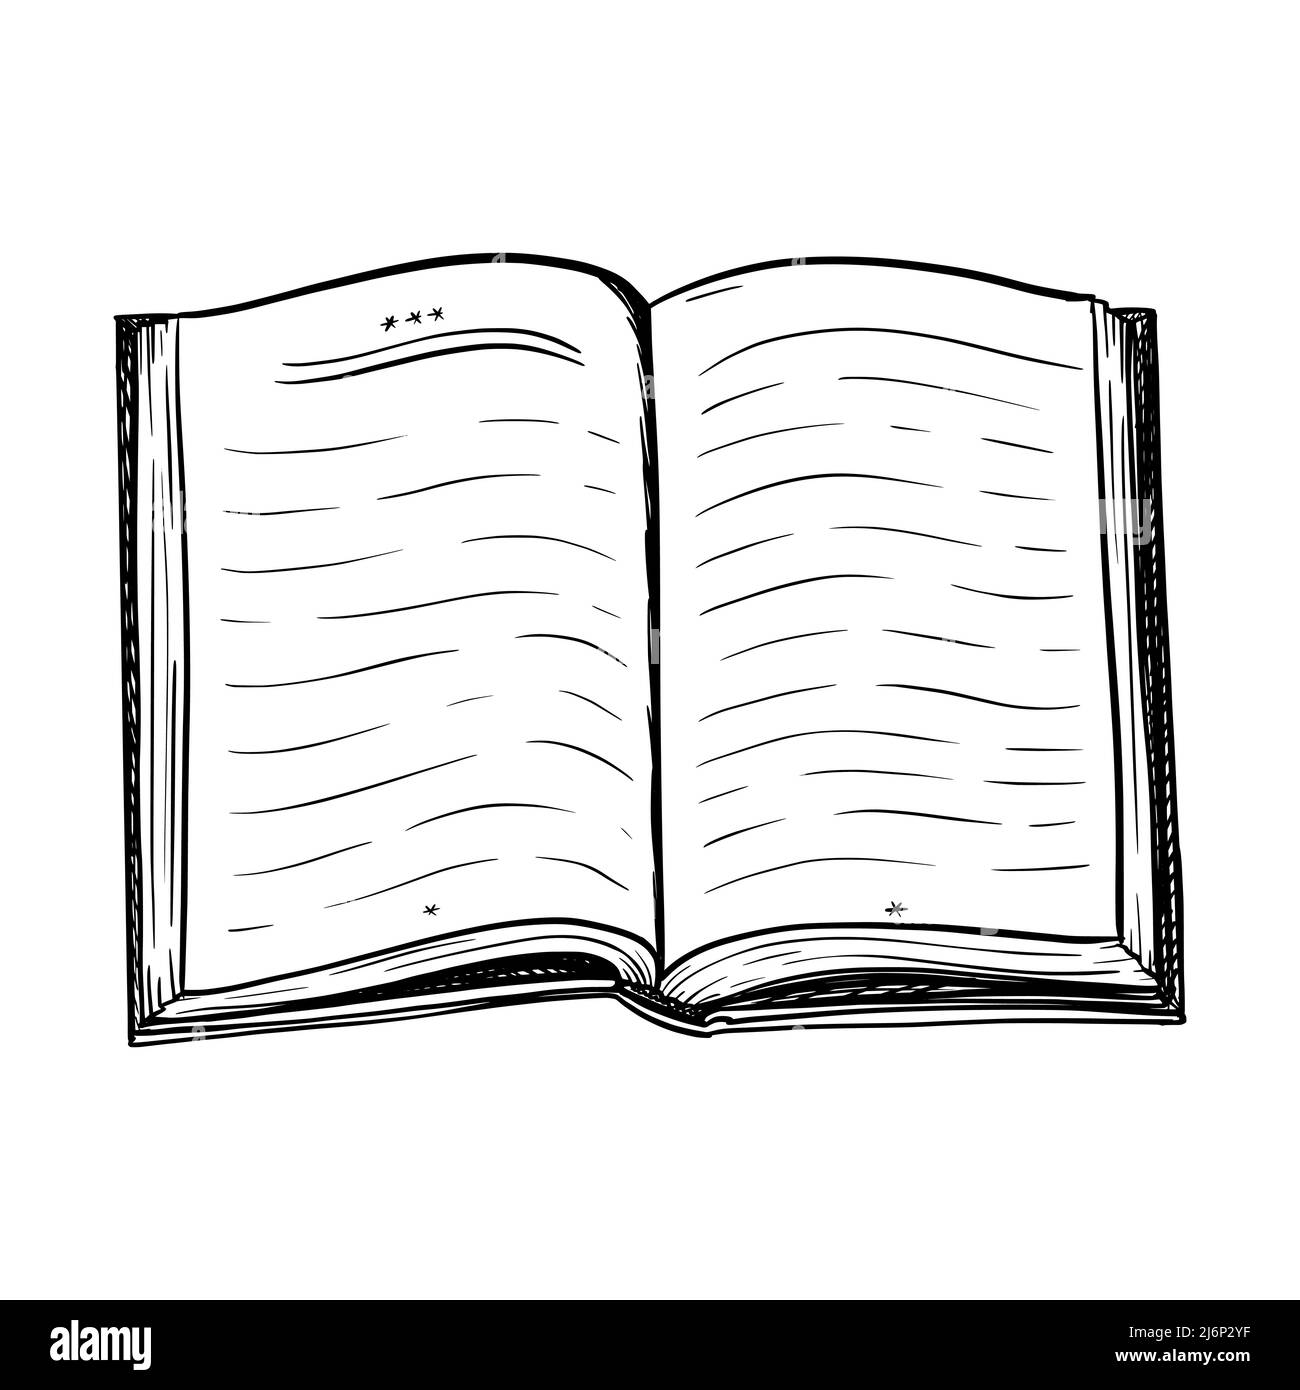 https://c8.alamy.com/comp/2J6P2YF/an-open-hardcover-bookthe-sketch-style-symbol-of-study-education-and-literature-black-and-white-vector-illustration-outline-hand-drawn-and-isola-2J6P2YF.jpg